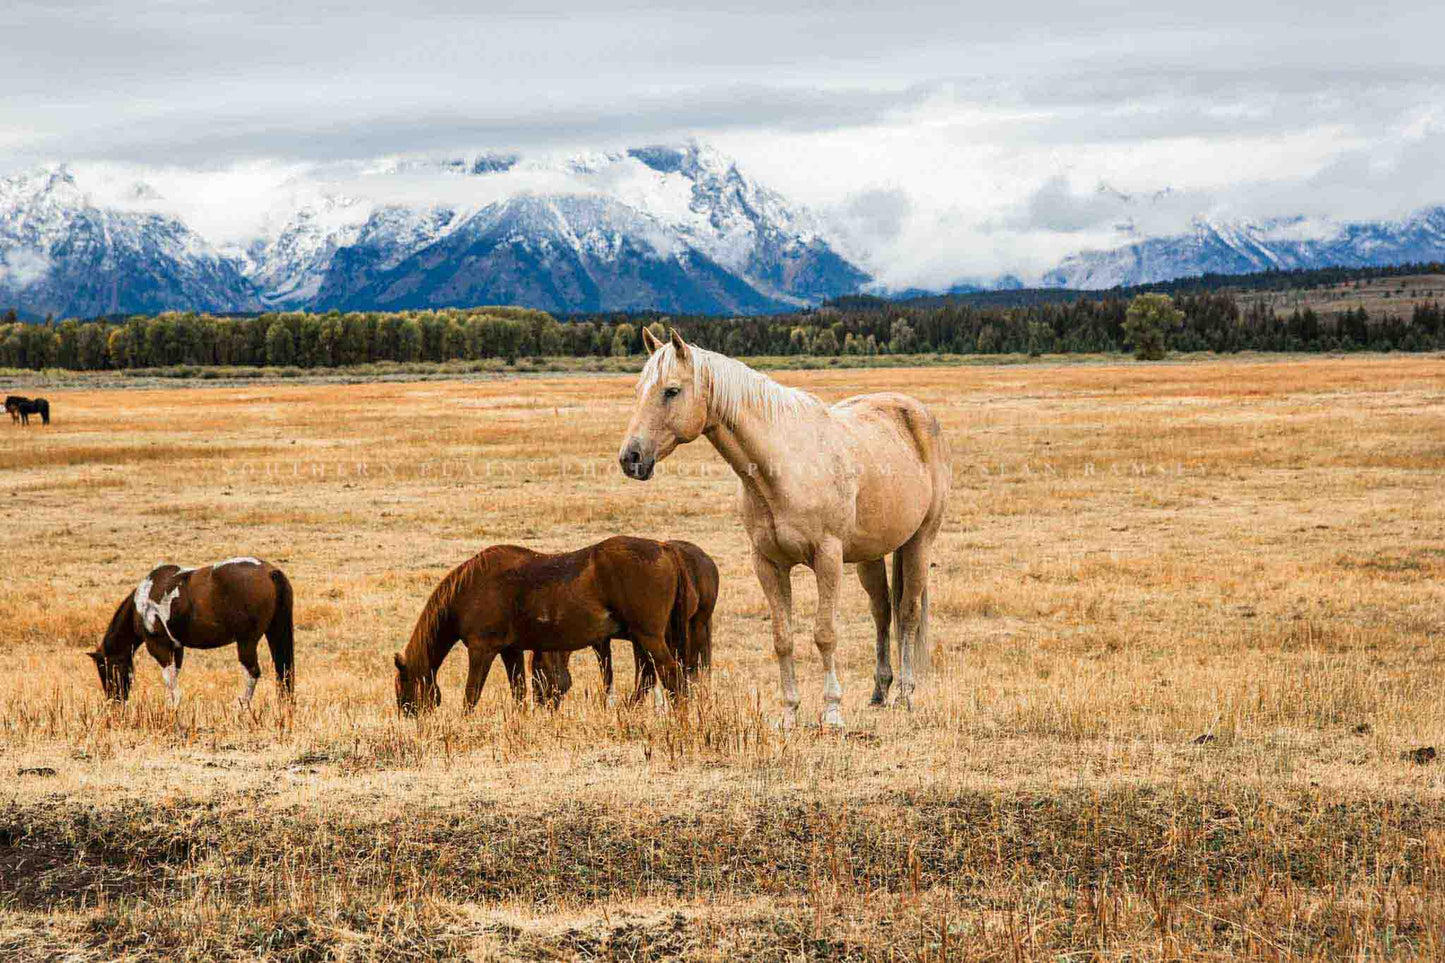 Equine photography print of a palomino horse posing on an autumn day in Grand Teton National Park by Sean Ramsey of Southern Plains Photography.